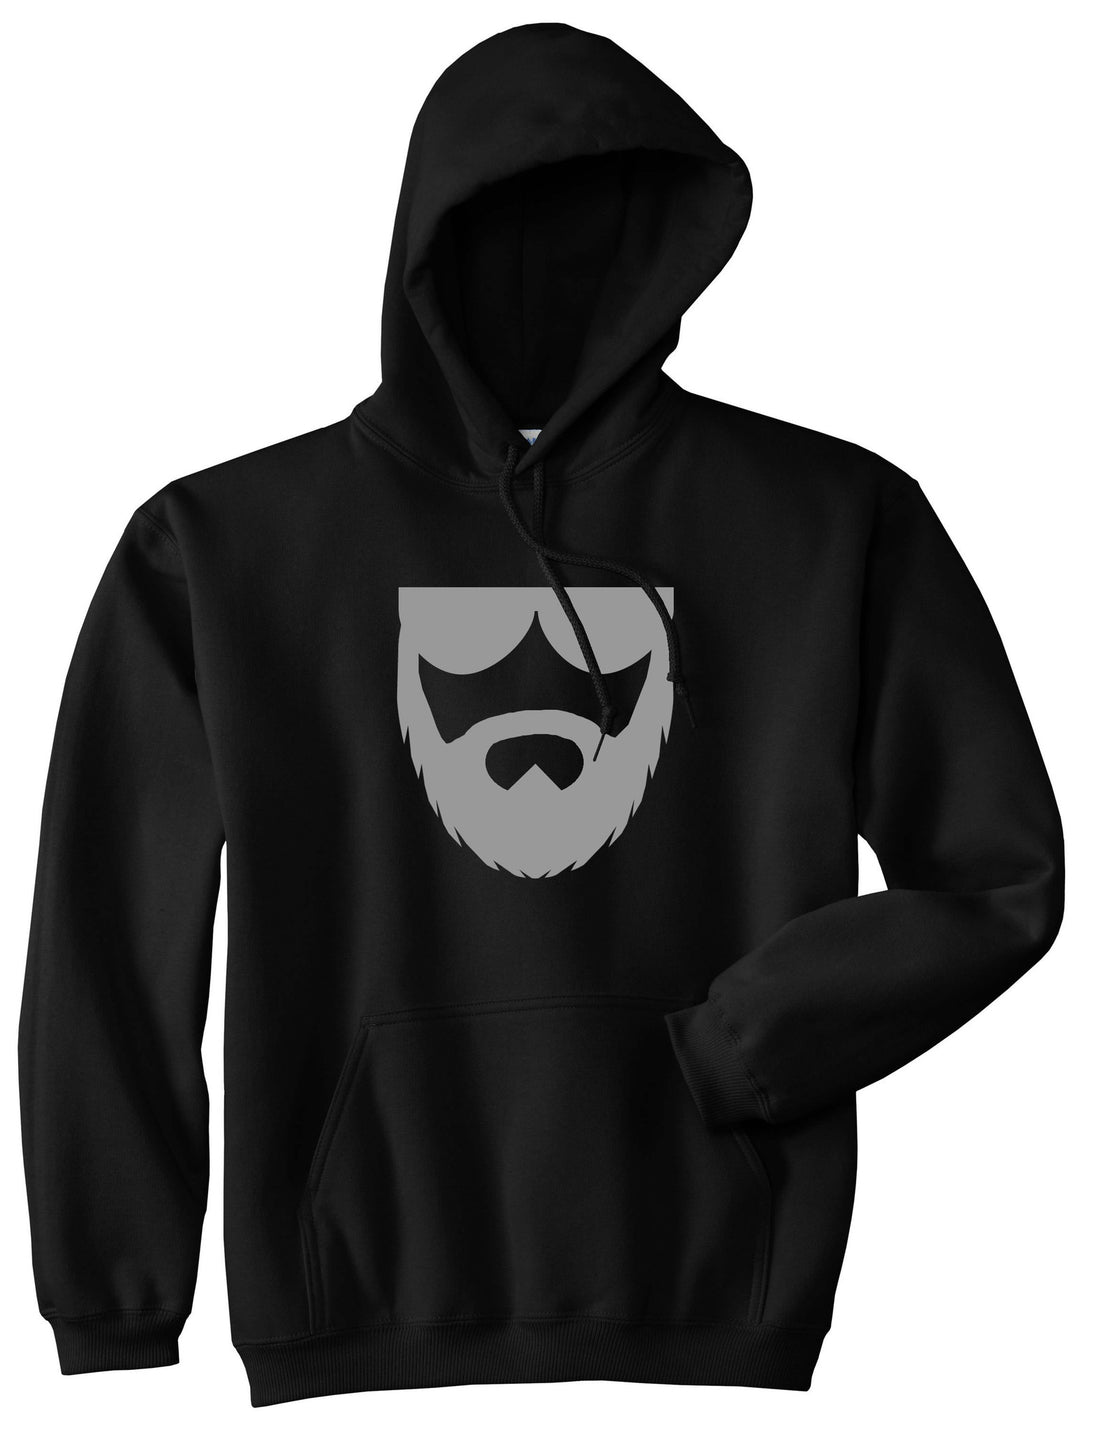 Beard With Glasses Pullover Hoodie